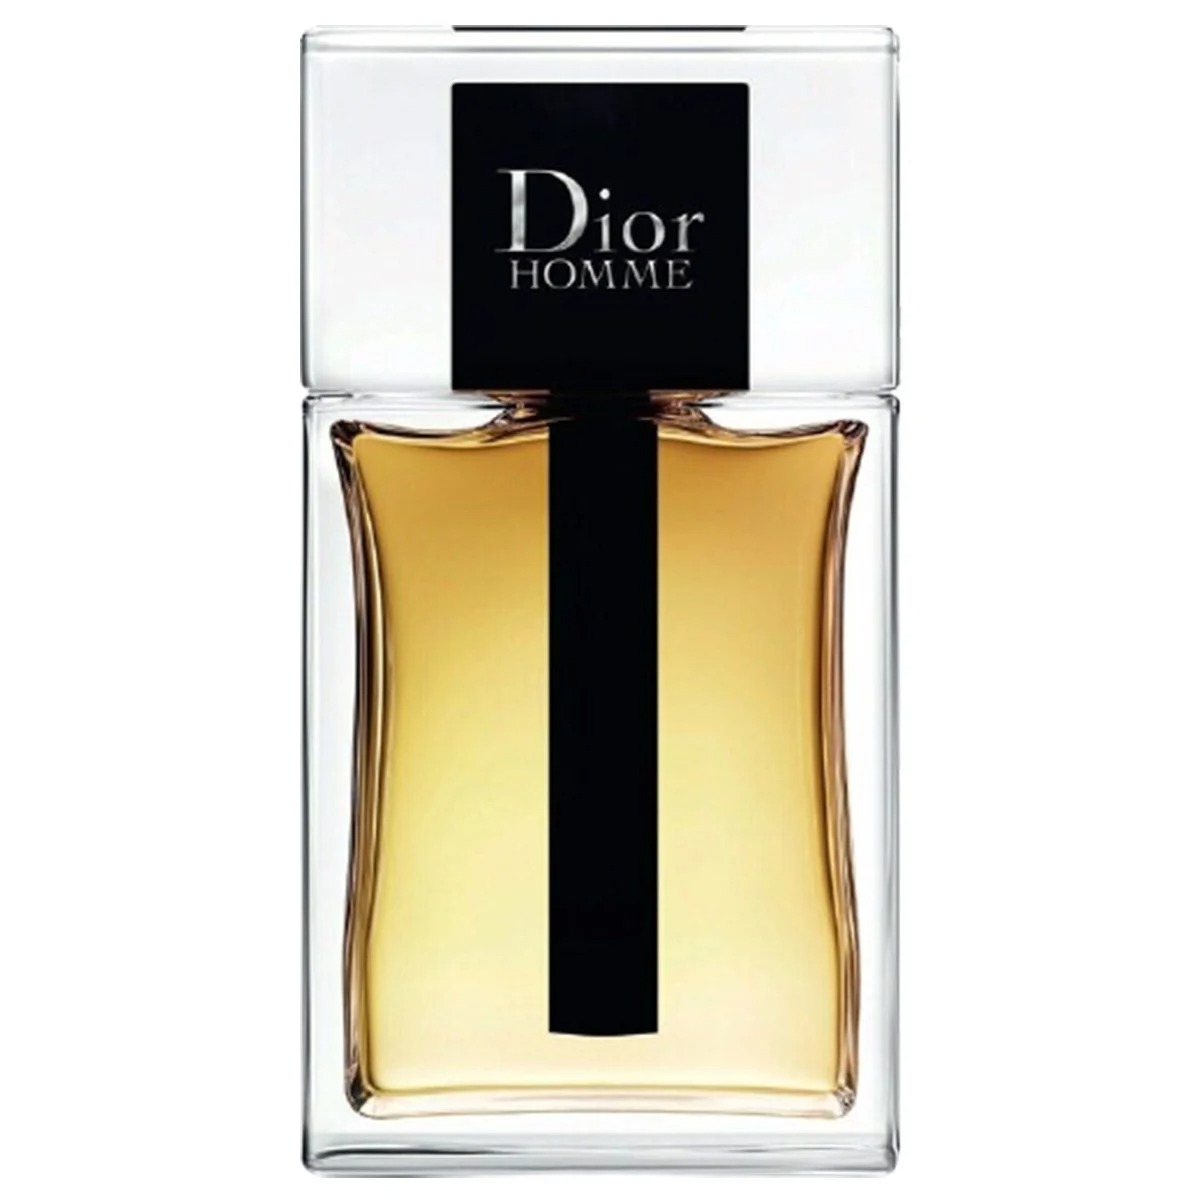 Dior Homme Intense 2020 by Christian Dior First Impression  GIVEAWAY   YouTube